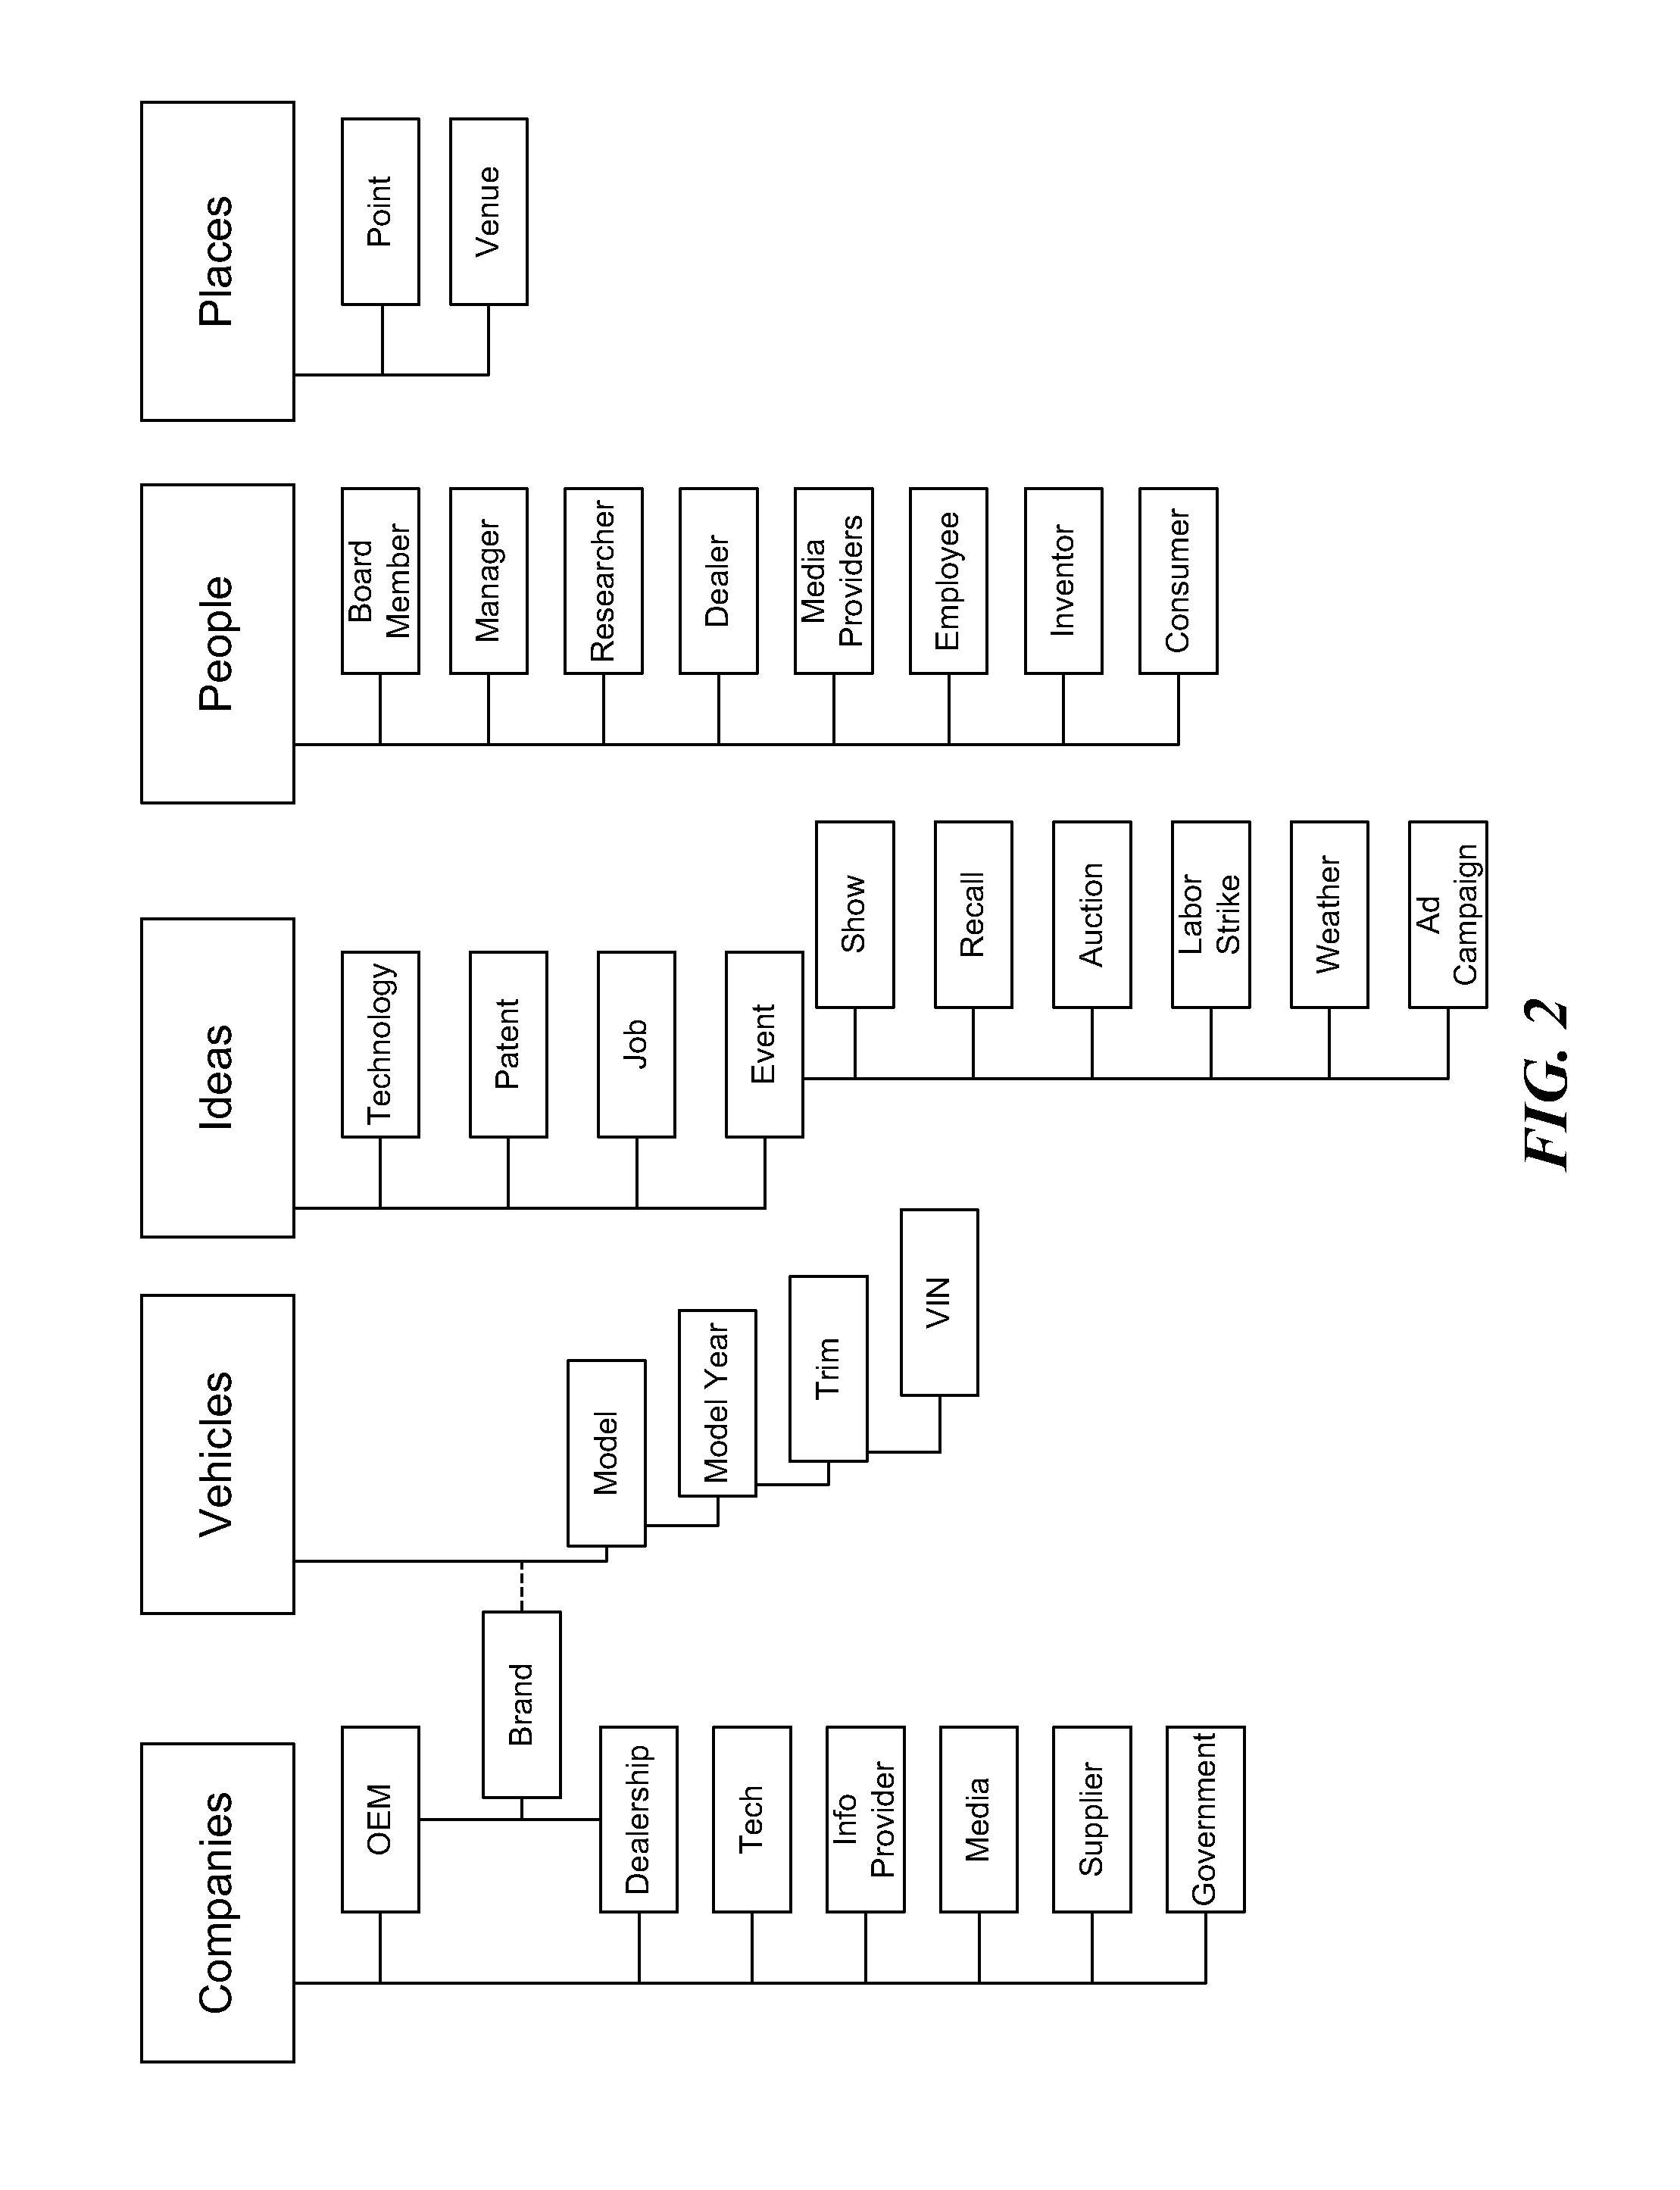 Systems and methods for ranking entities based on aggregated web-based content